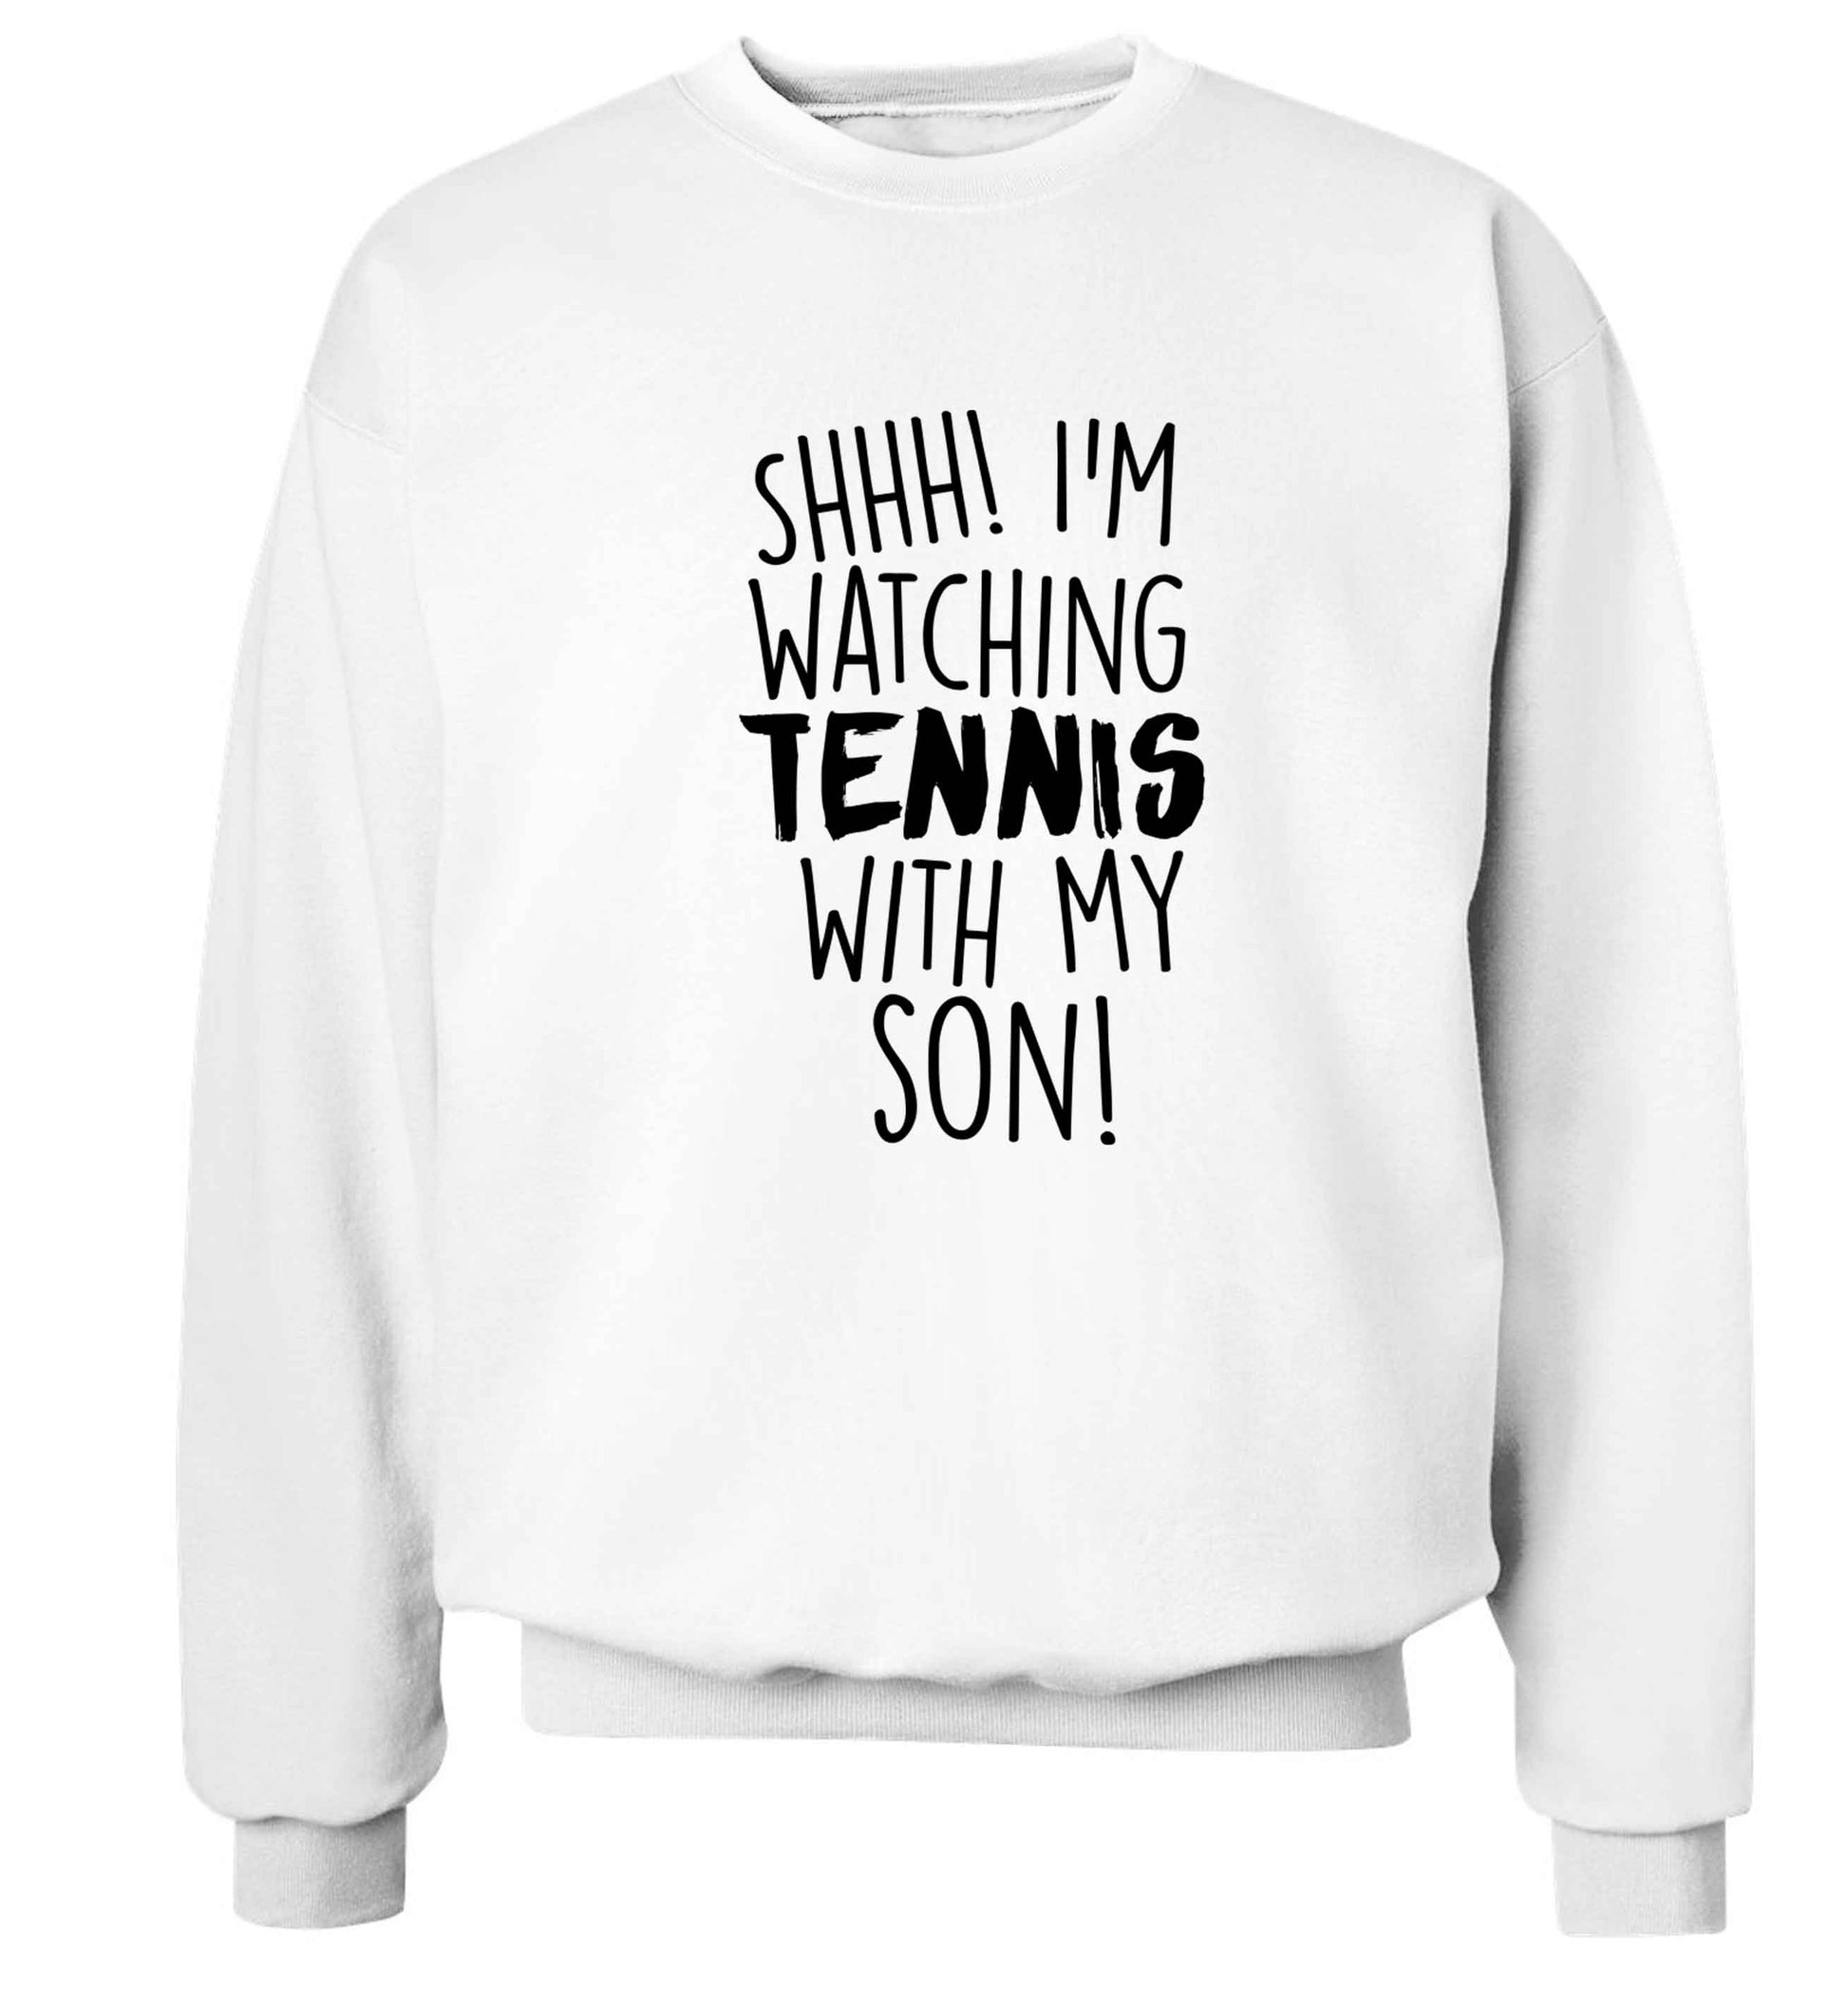 Shh! I'm watching tennis with my son! Adult's unisex white Sweater 2XL